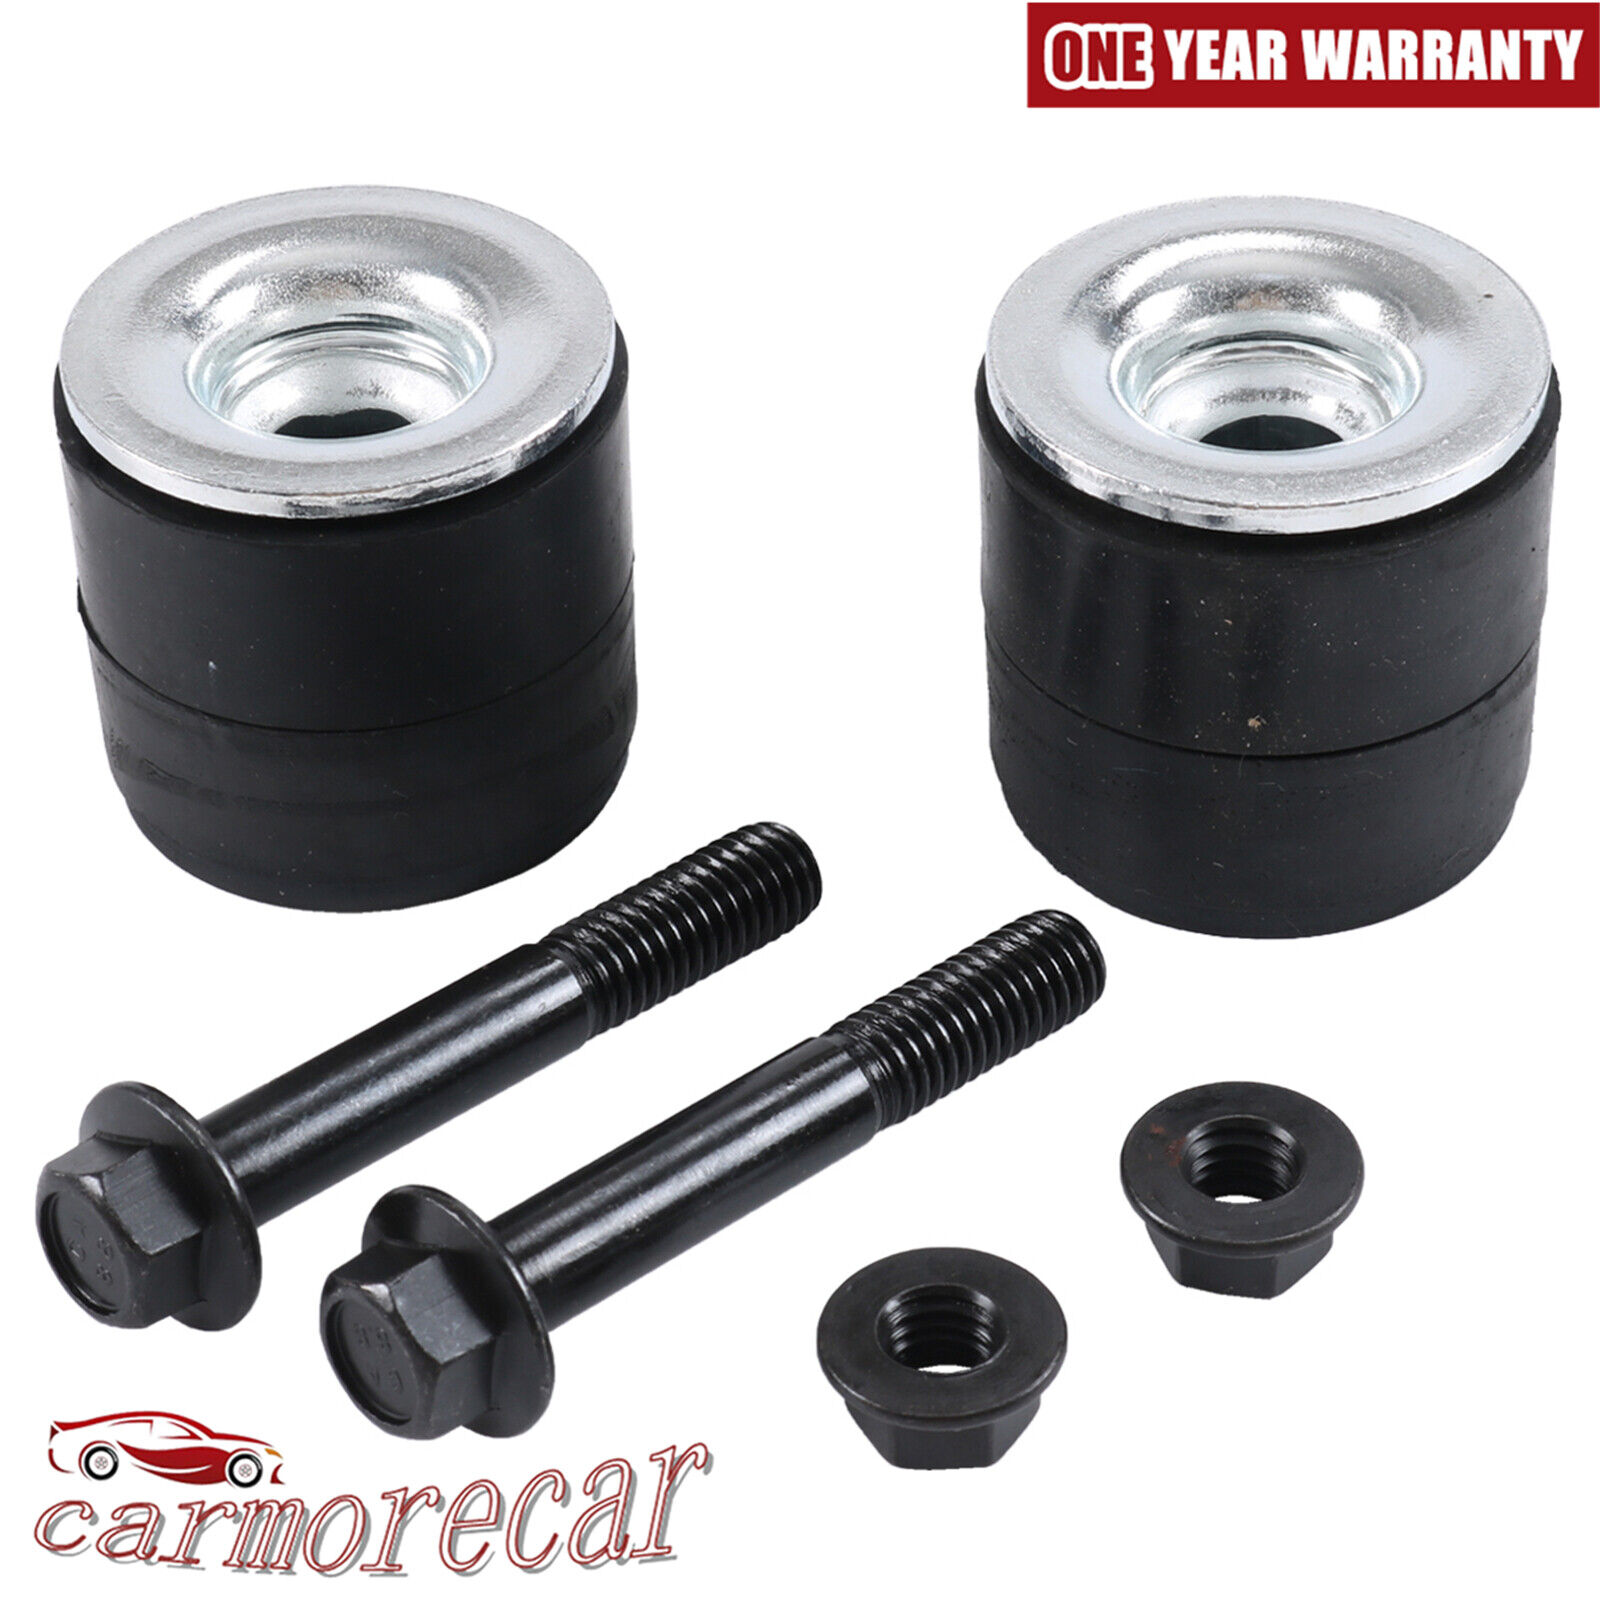 For 1967-1989 GM Rubber Radiator Core Support Body Mount Bushings & Bolts